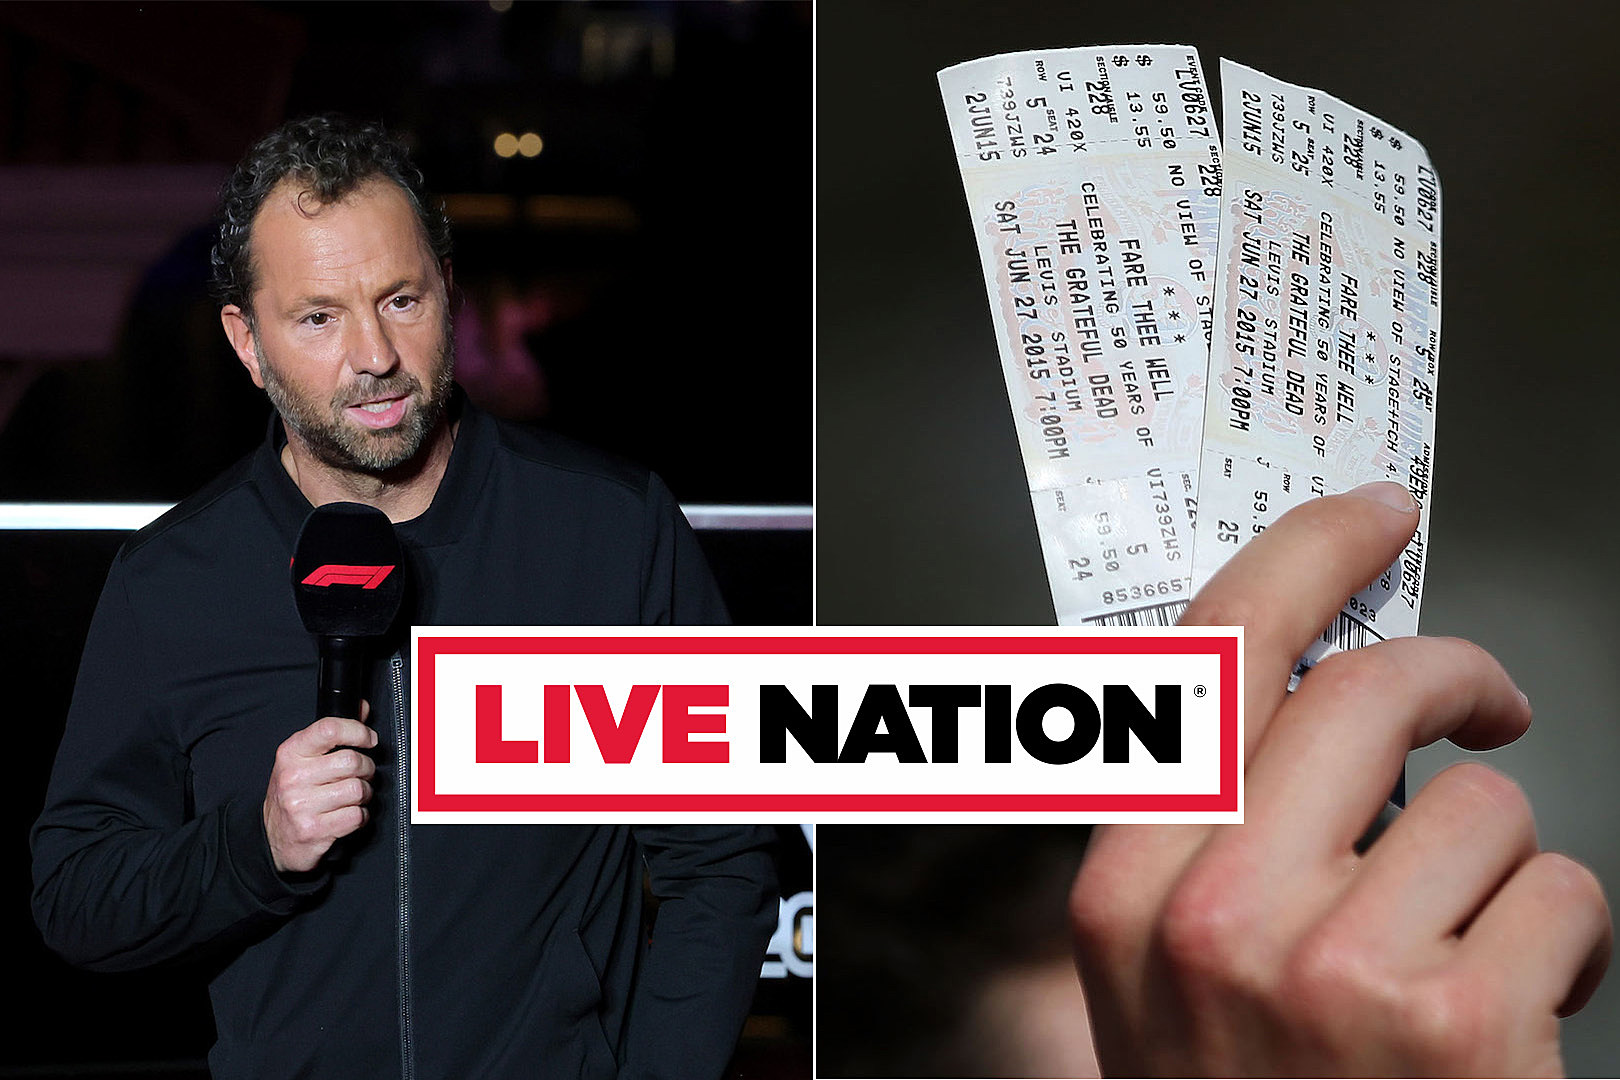 Live Nation selling $20 concert tickets